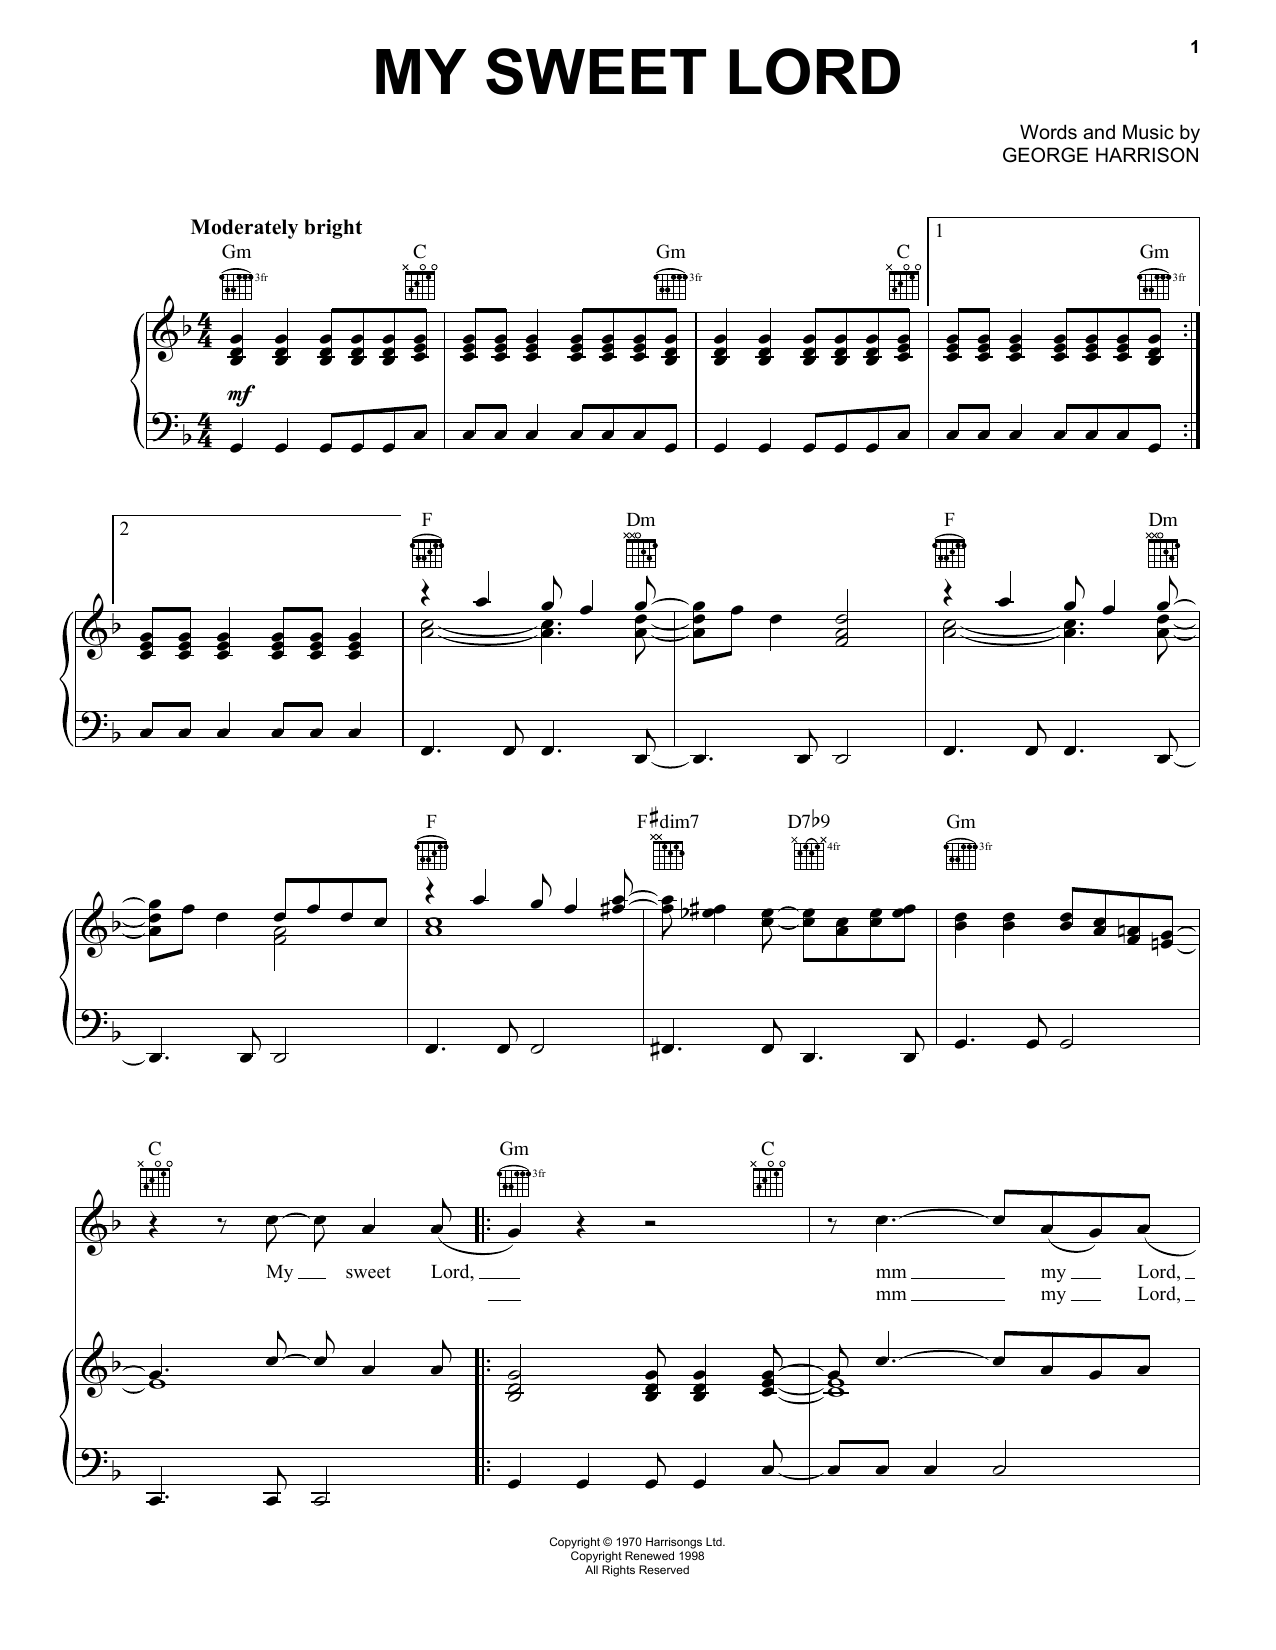 George Harrison My Sweet Lord sheet music notes and chords. Download Printable PDF.